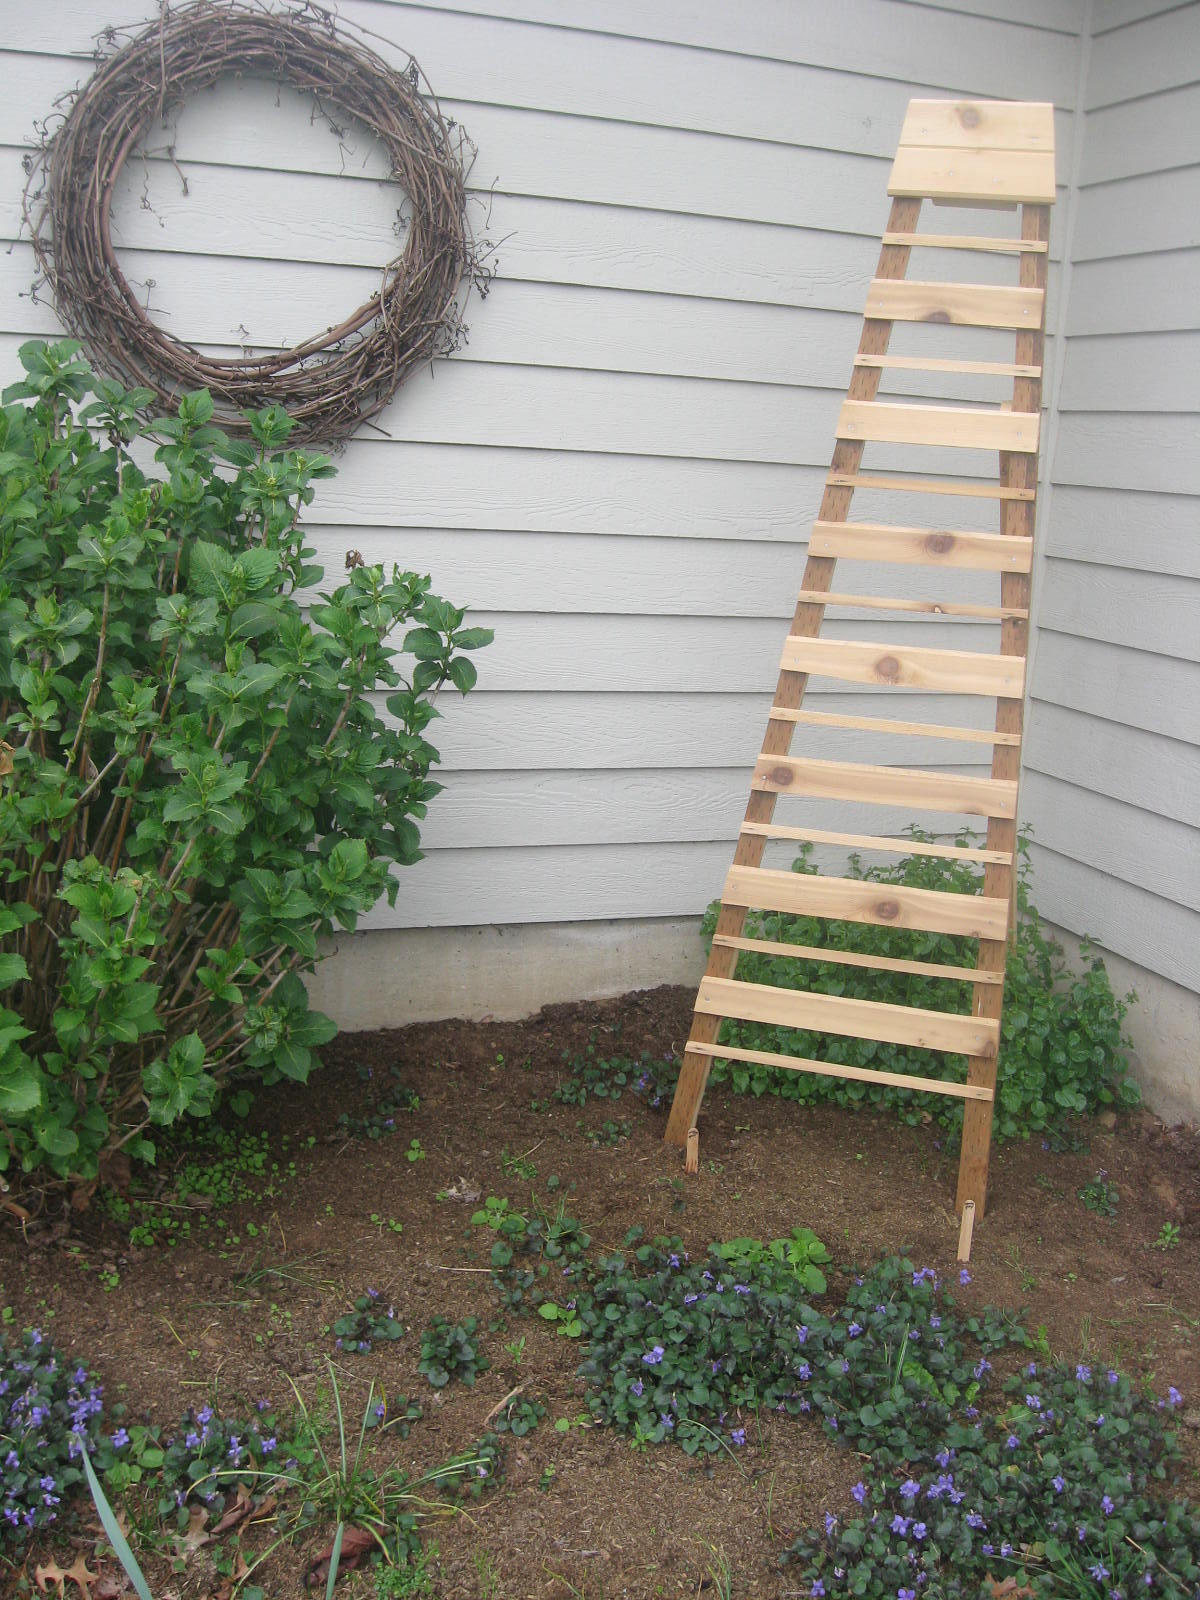 Free Junkie Fridays - Free Wood Project ideas - CountryCottageLiving